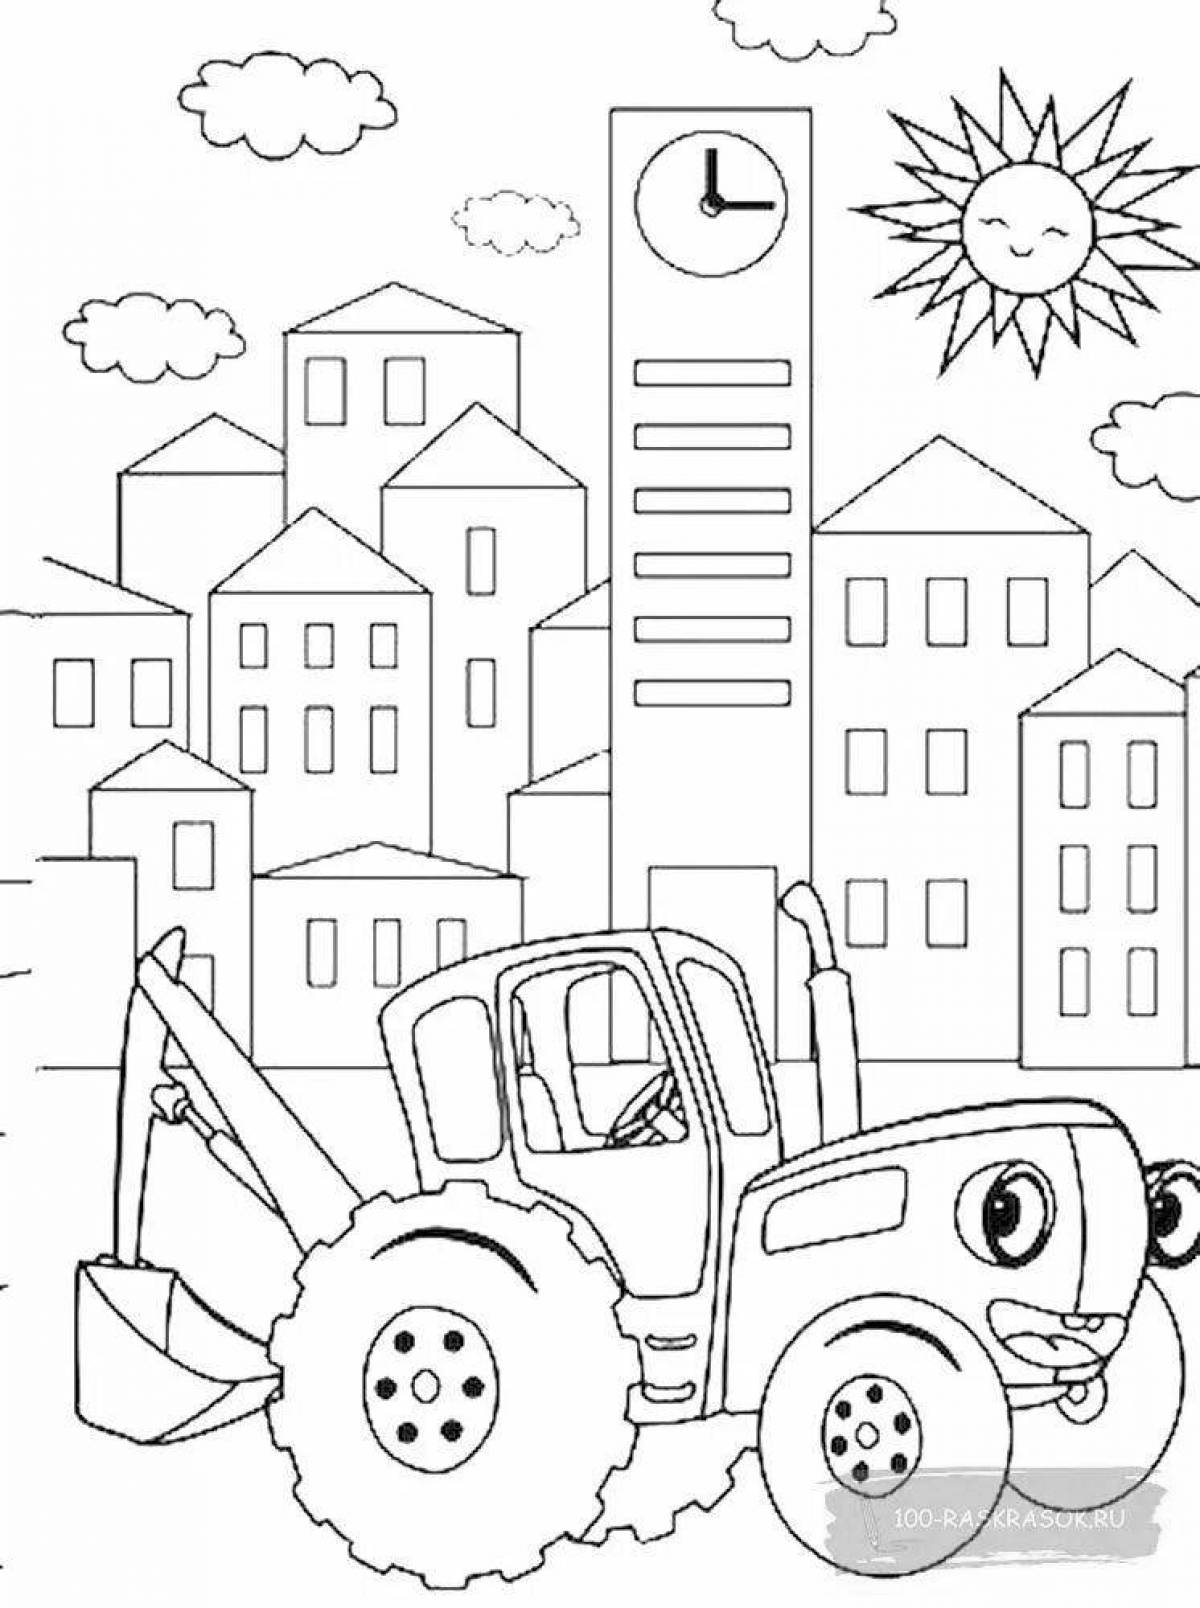 Coloring book colorful house blue tractor